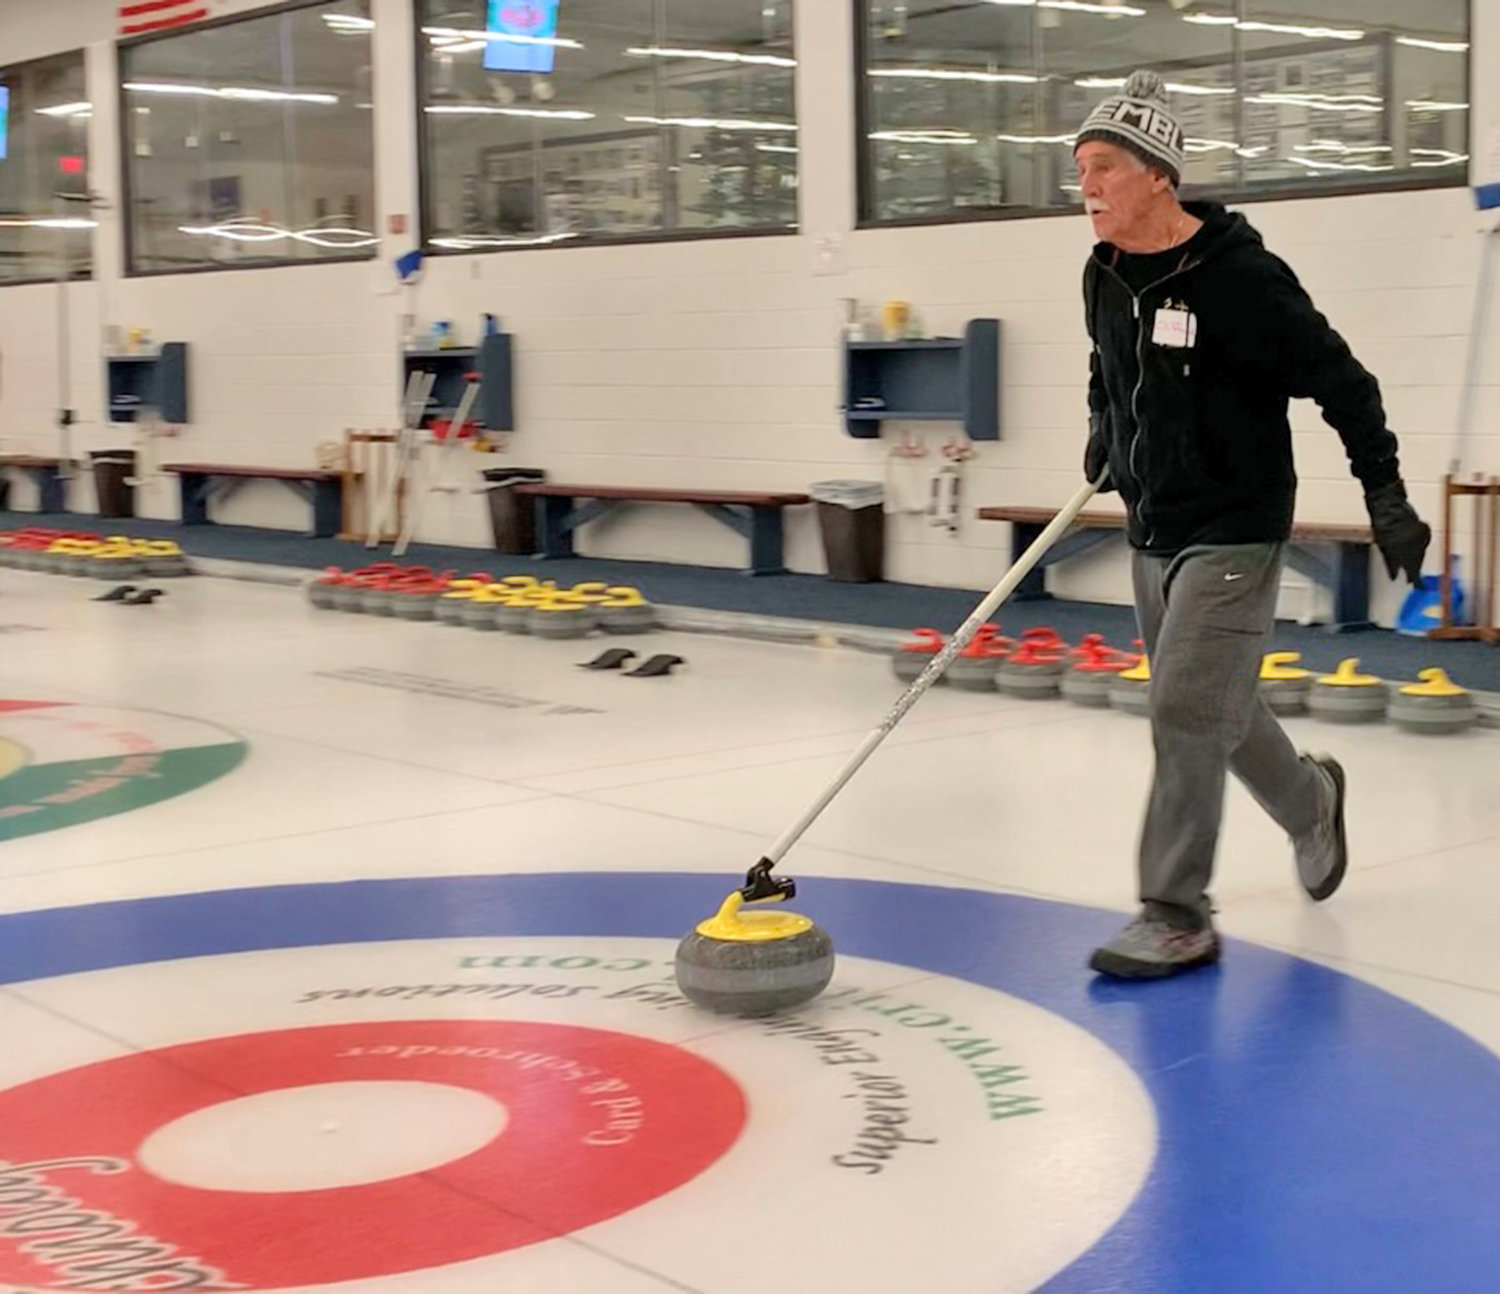 Clifford Crandall Jr. delivers a curling stone from the standing position at Utica Curling Club.